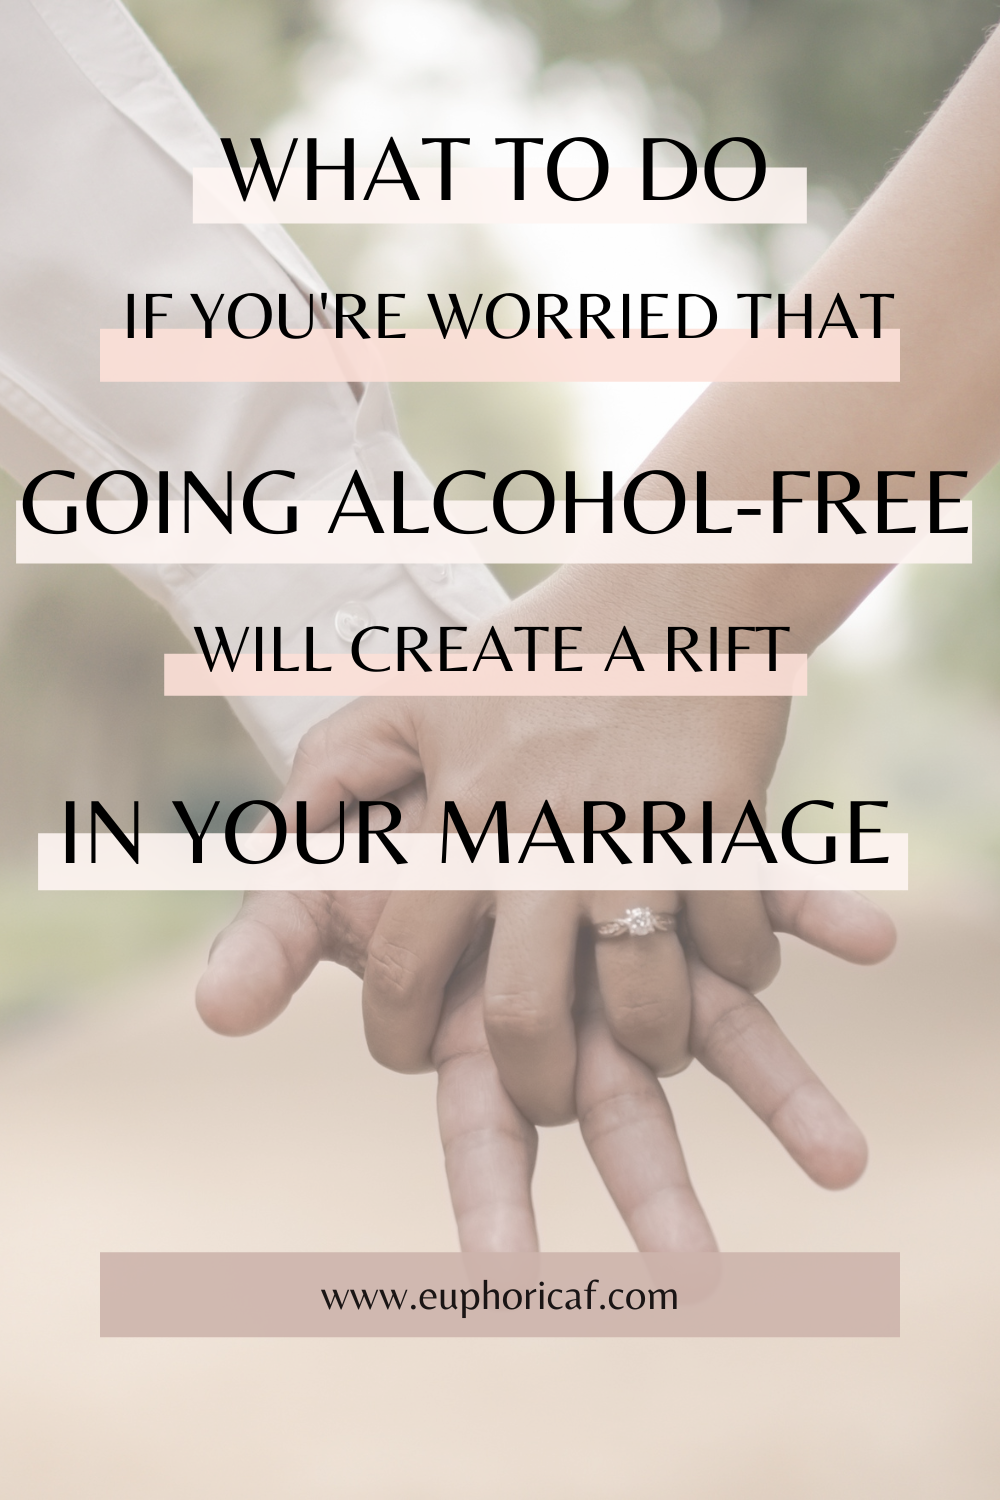 What to Do if Youre Worried Going Alcohol-Free Will Create a Rift In Your Marriage — Euphoric pic